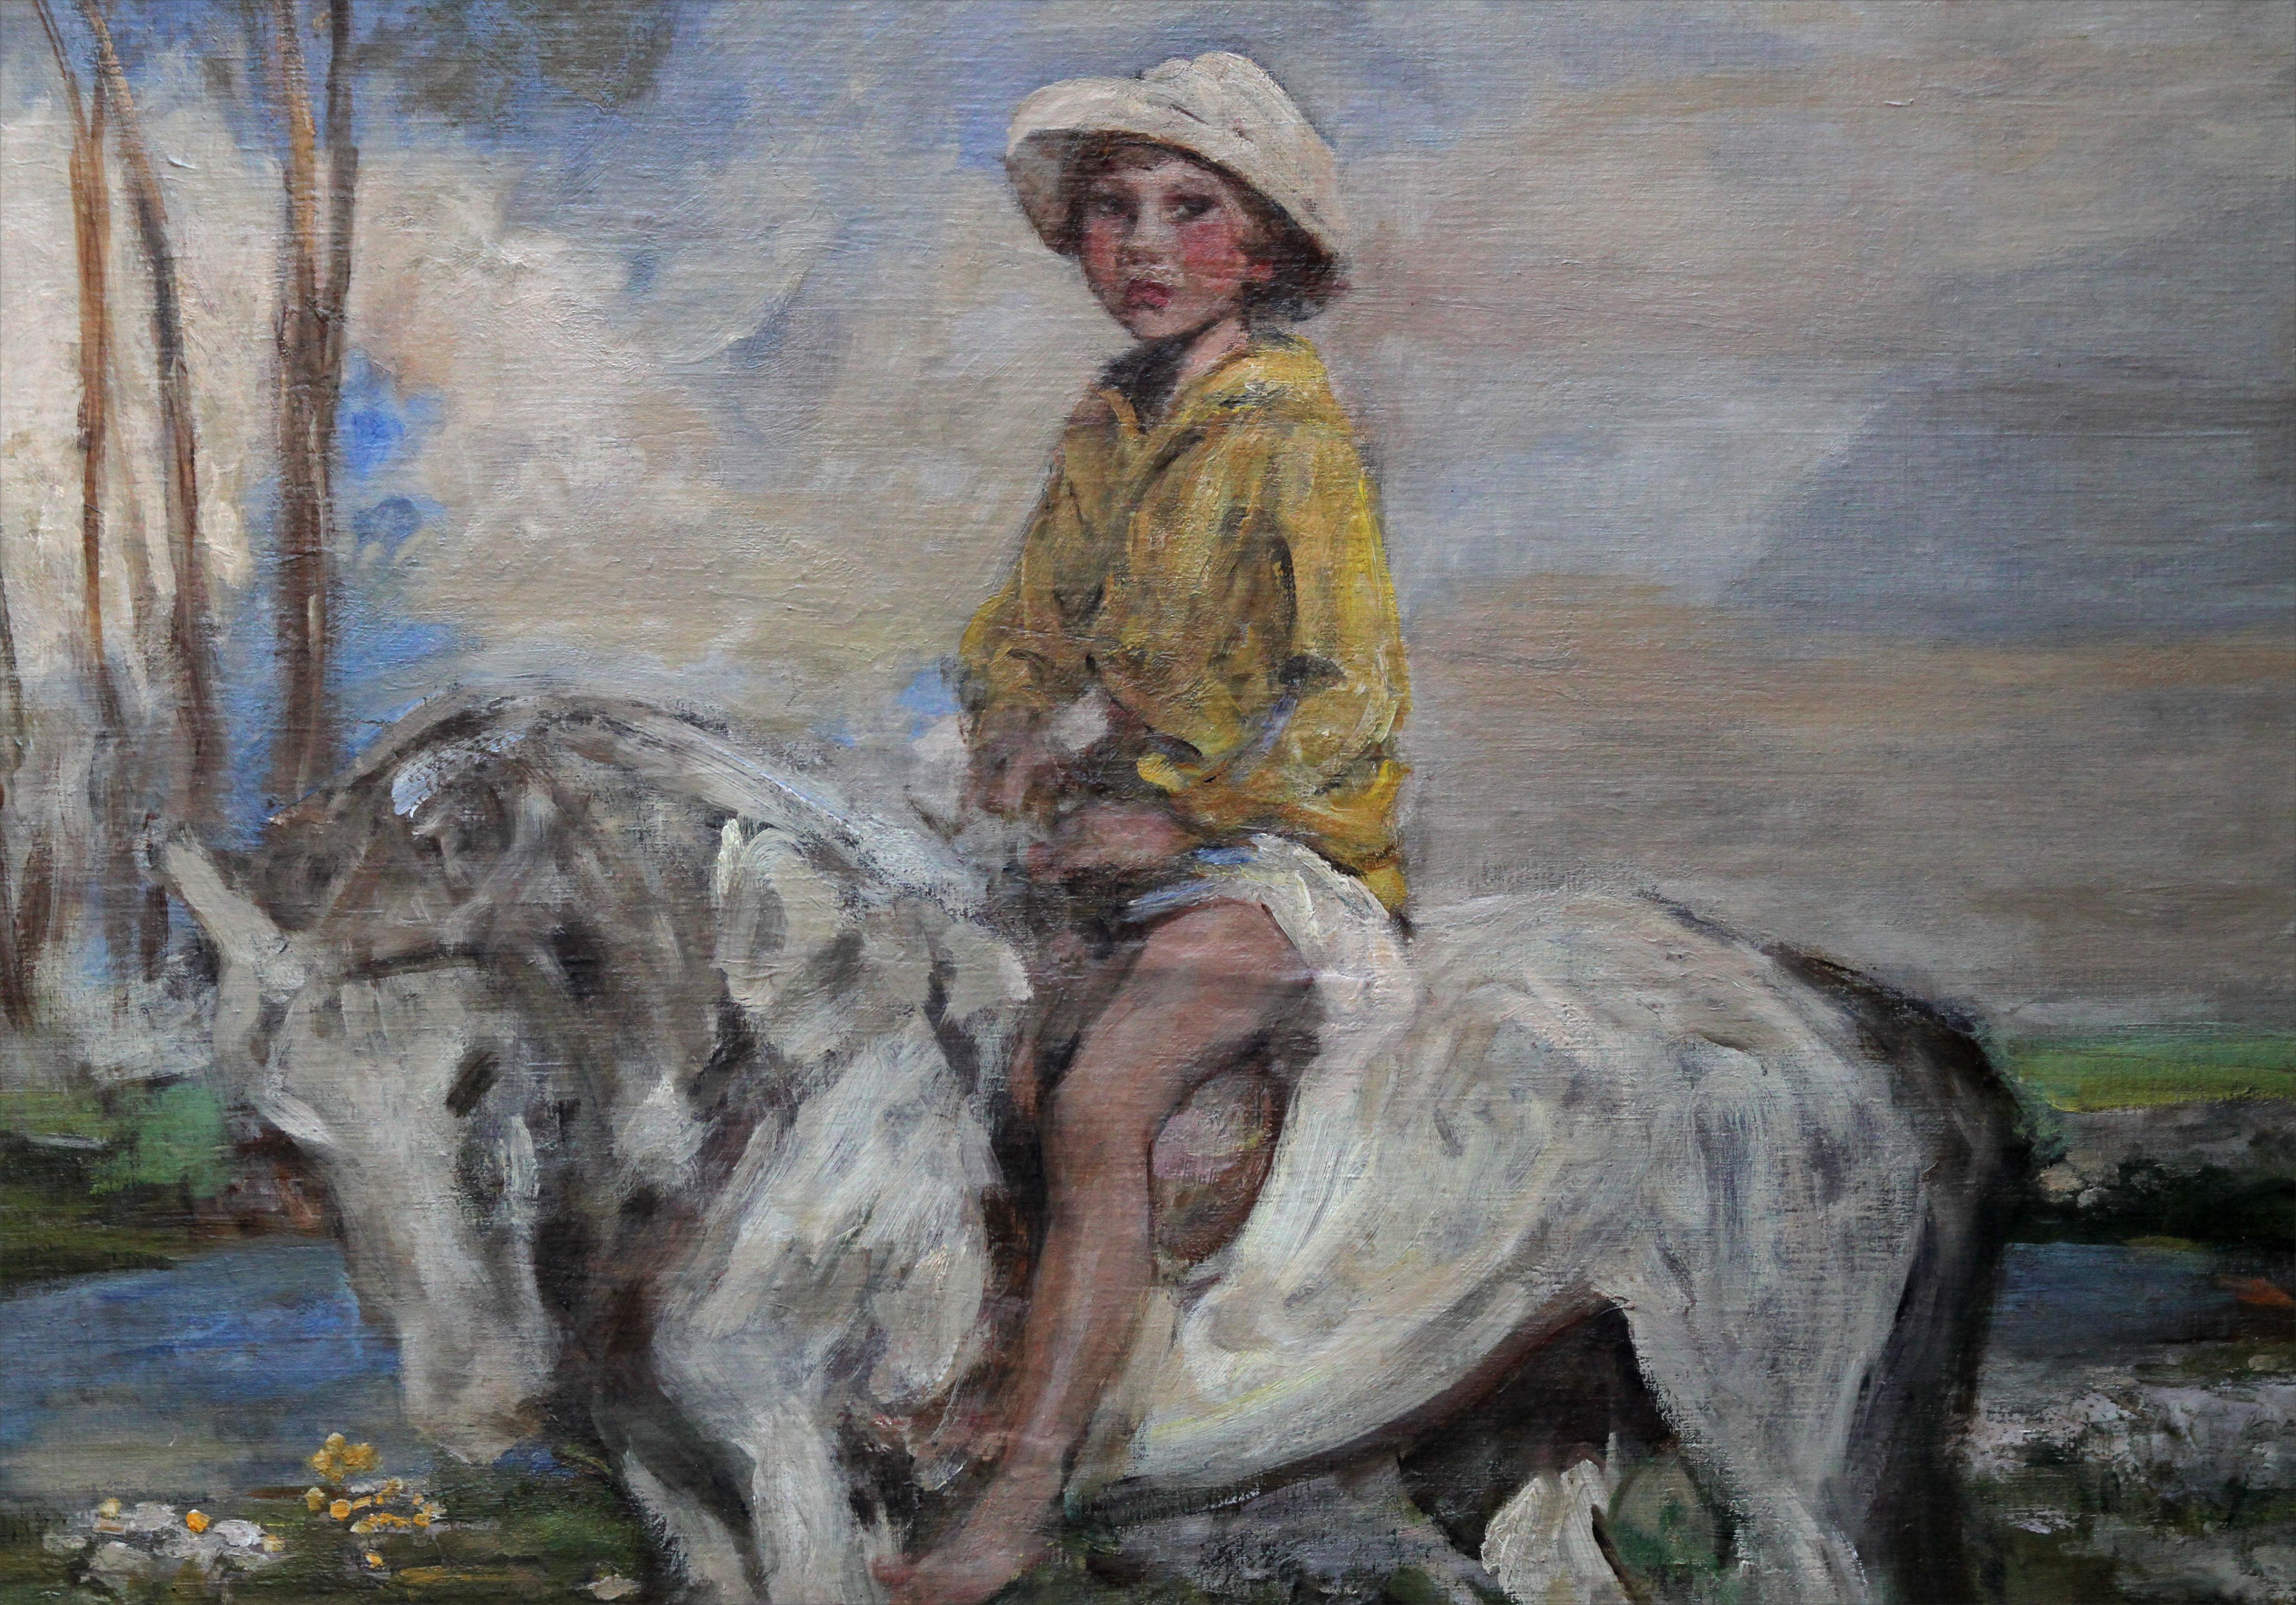 An original large oil on canvas/panel by Sir James Jebusa Shannon. The portrait dates to the Edwardian period and depicts a bold British Impressionist painting of his grandson Jeb Keigwin on a pony. Housed in an ebonised frame of the period. A